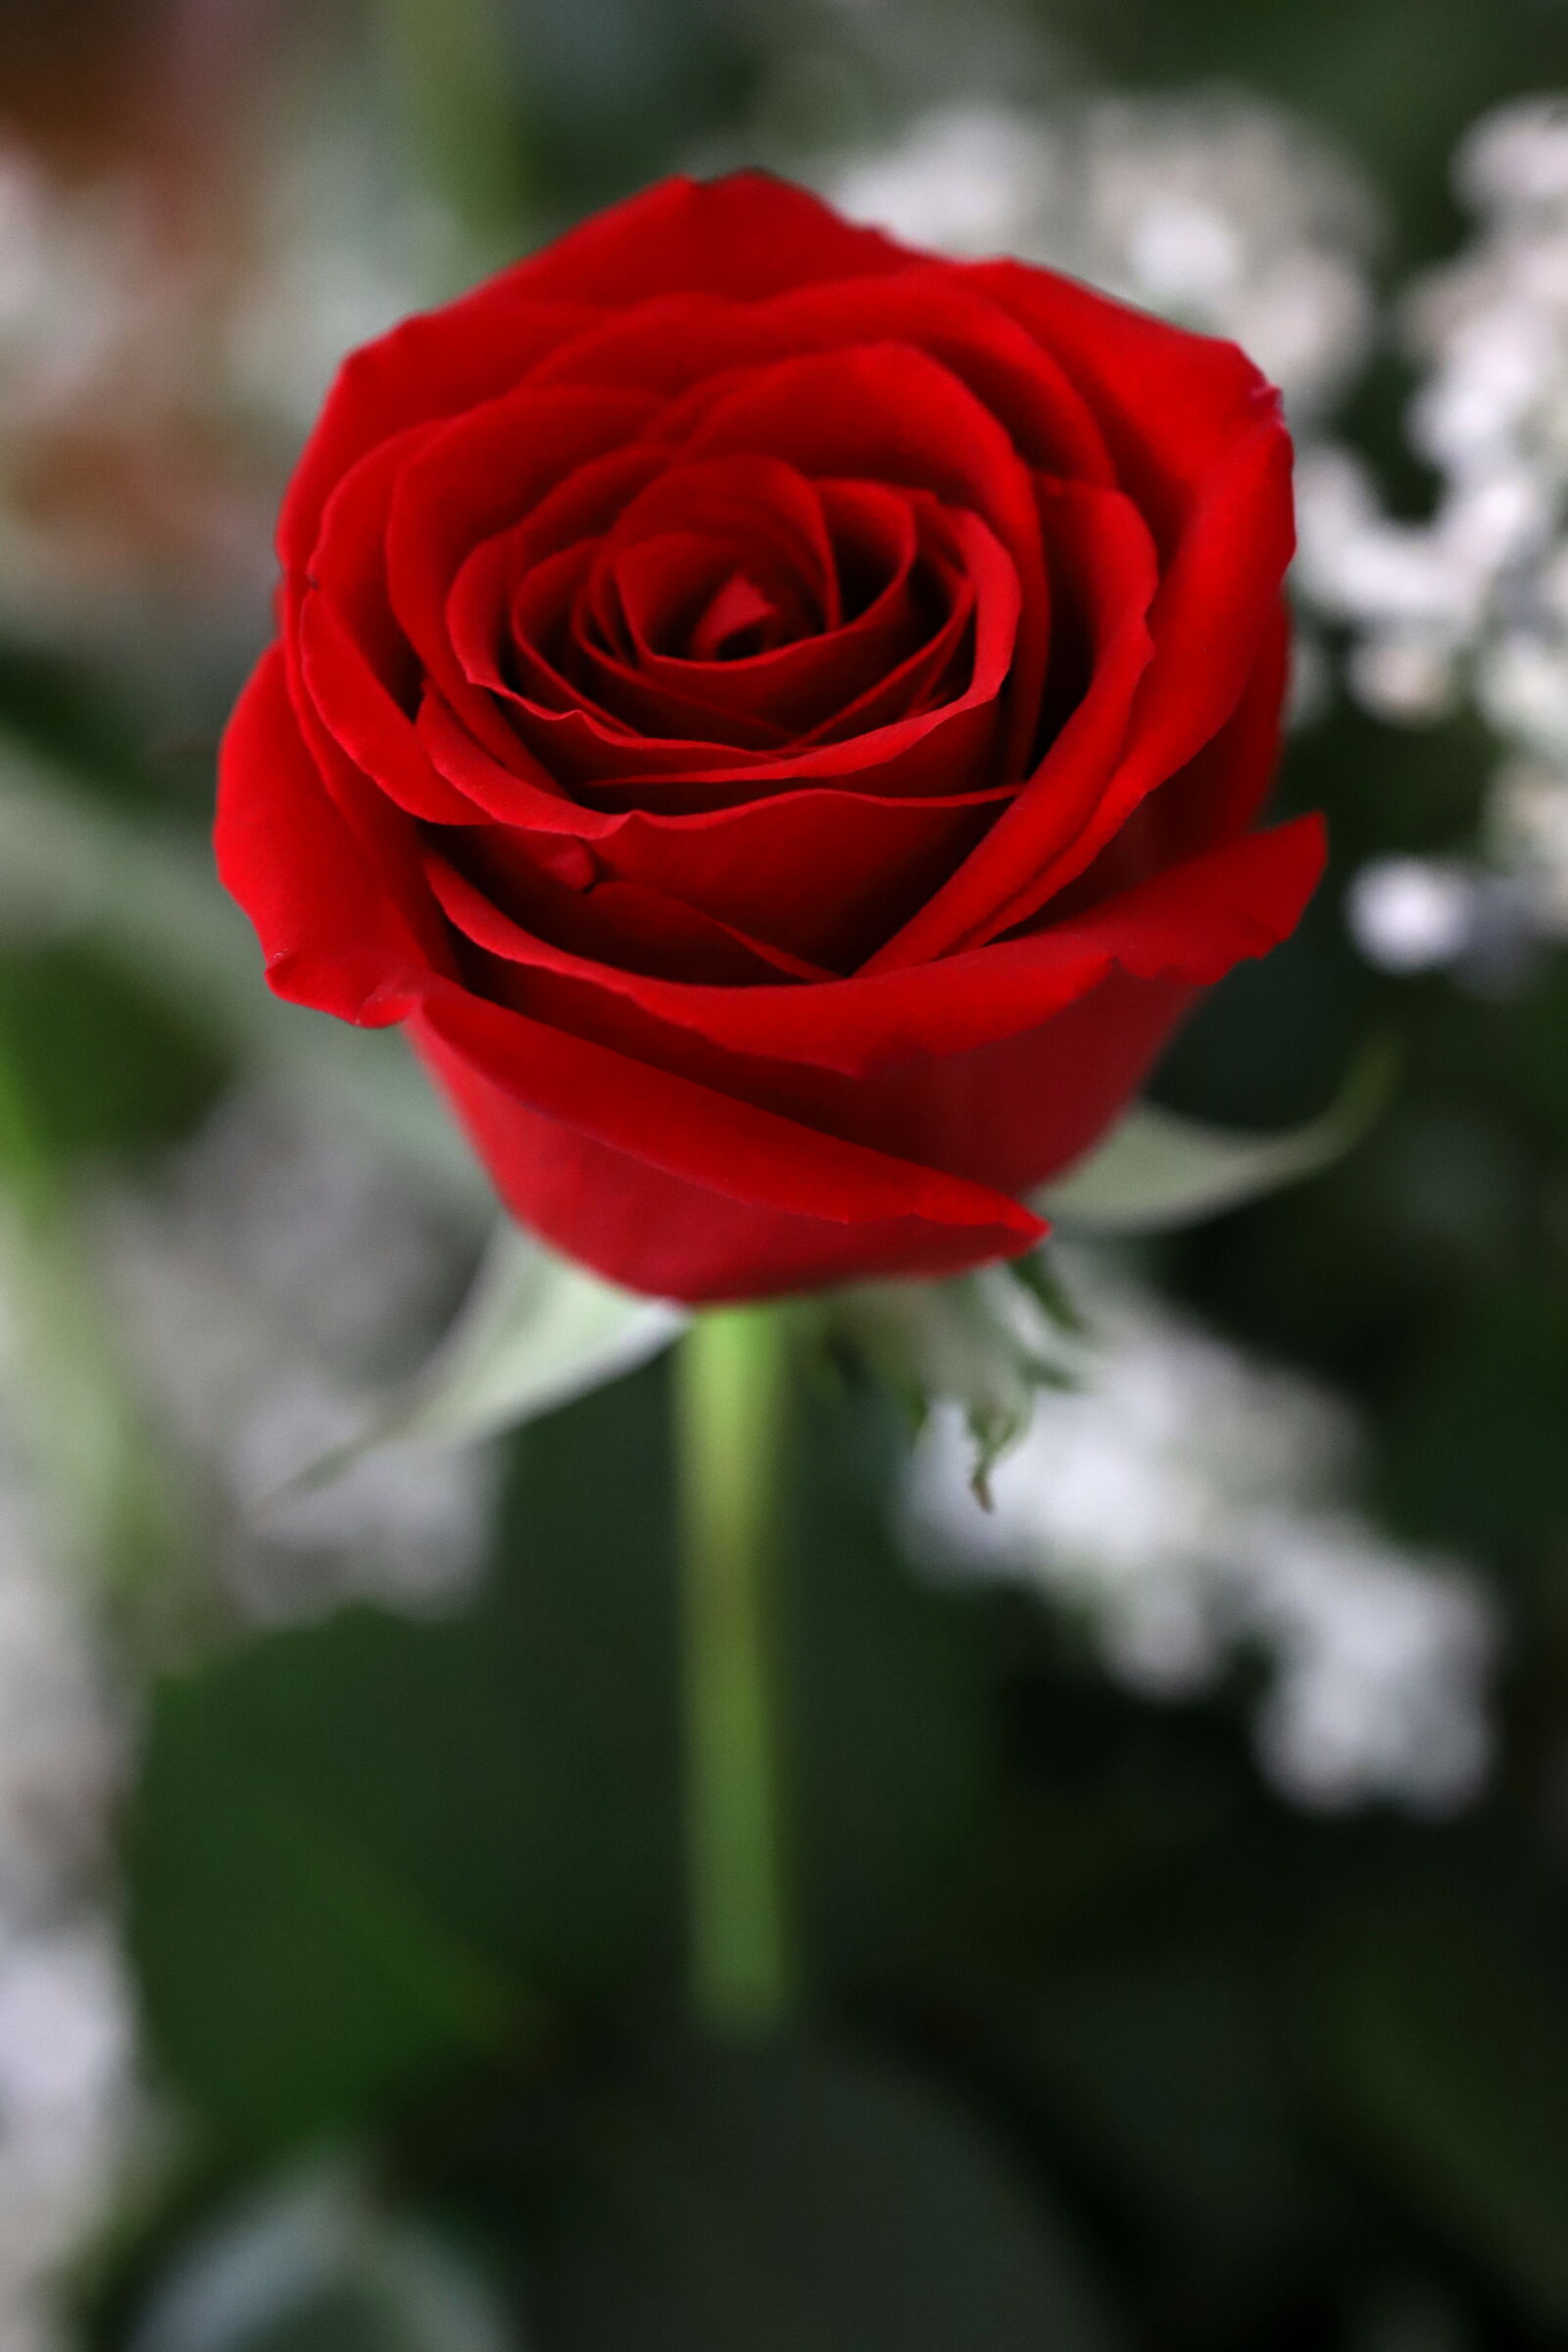 The Rose of Love...